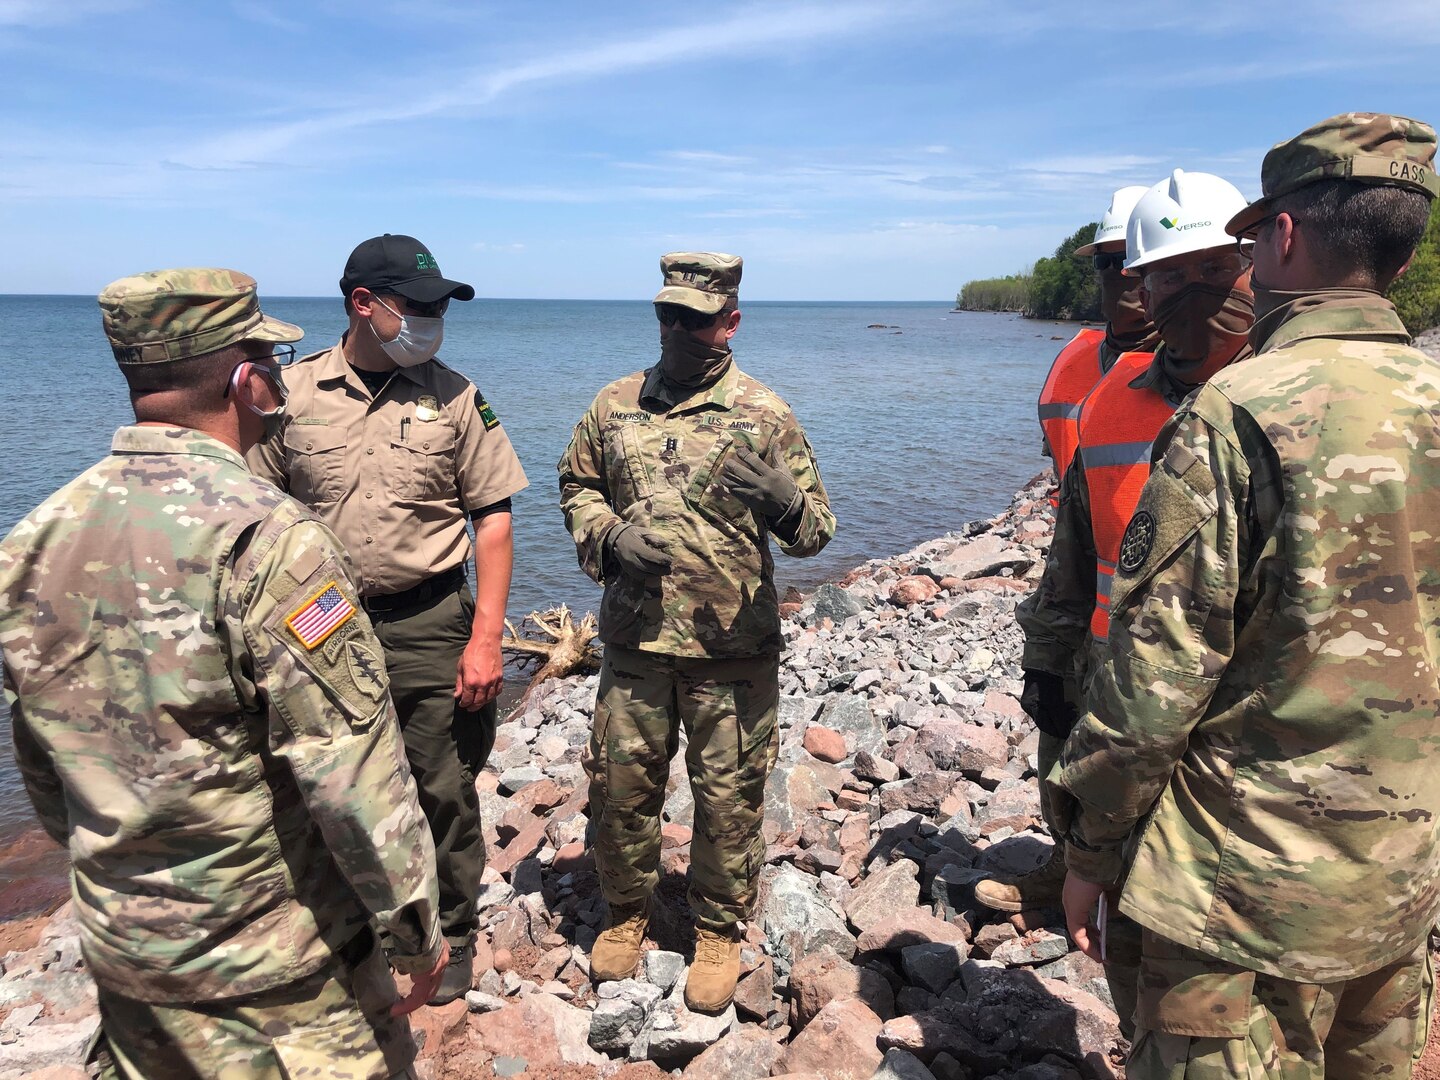 The Michigan National Guard’s 1432nd Engineer Company and the Department of National Resources have been upgrading infrastructure at Porcupine Mountains Wilderness State Park in Ontonagon County.